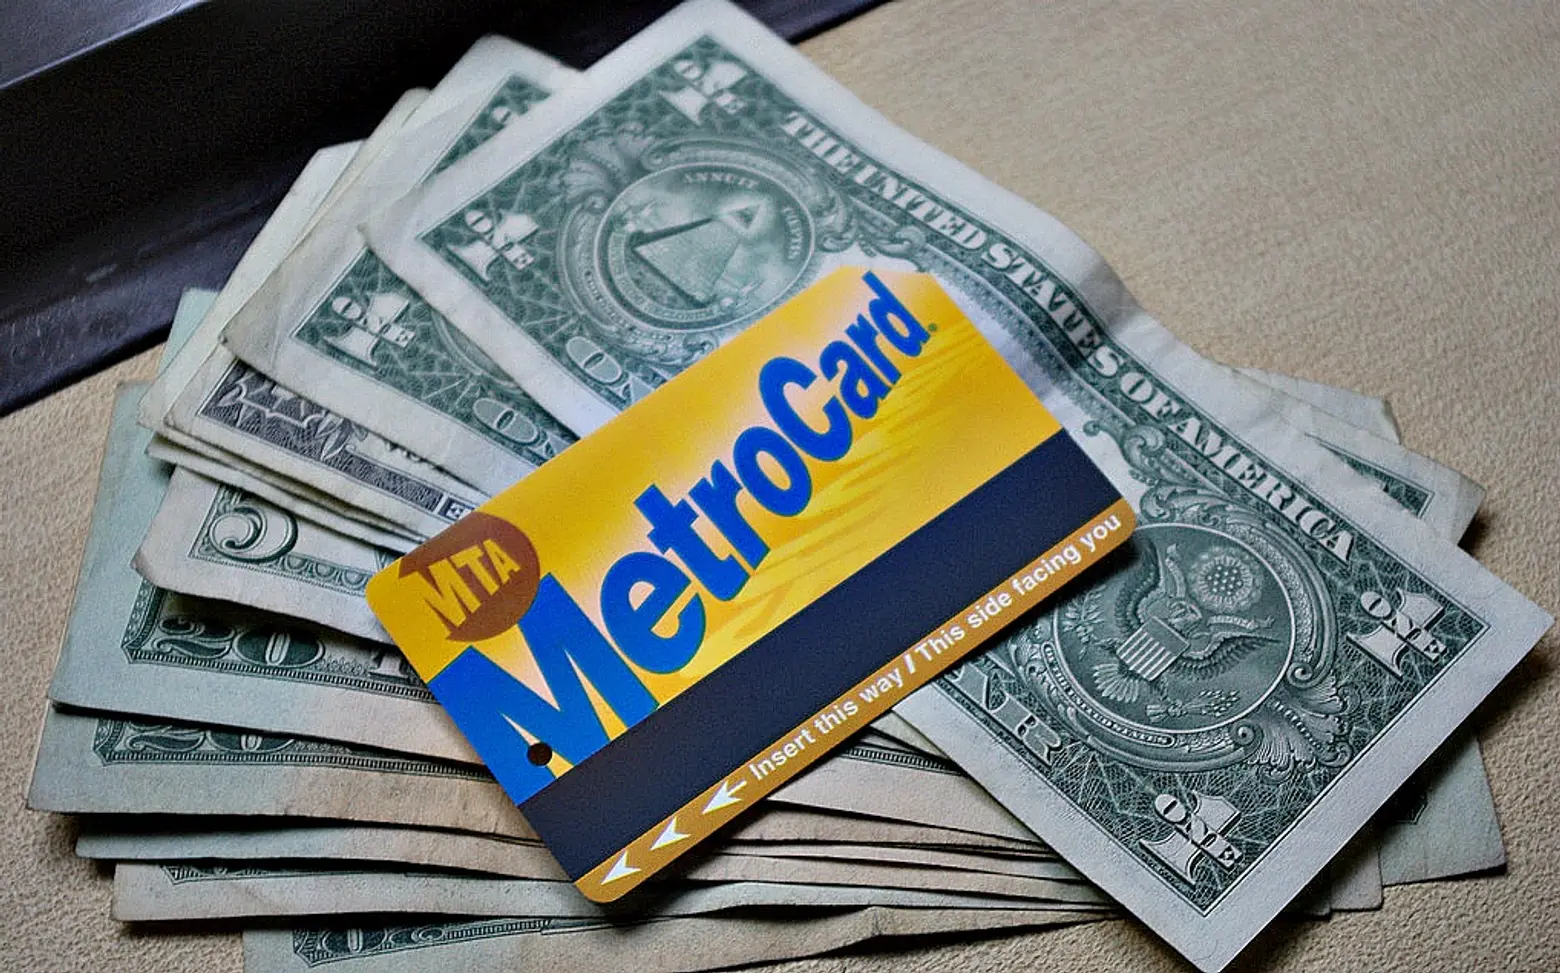 City Council wants half-price MetroCards for low-income New Yorkers; Essex Street Market to hold a block party